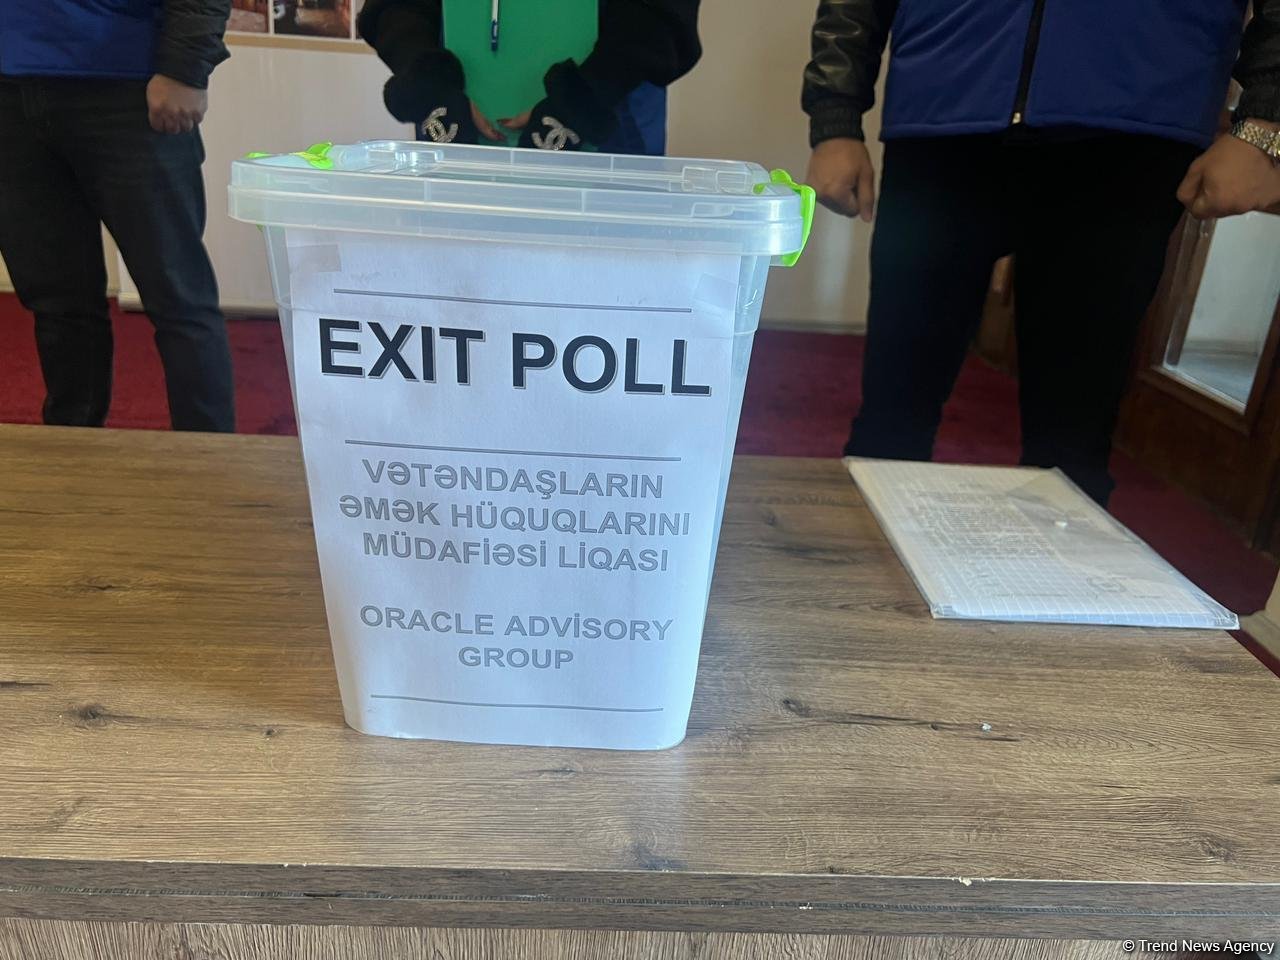 Local monitoring center reveals results of exit poll in Azerbaijan as of 4:00 PM